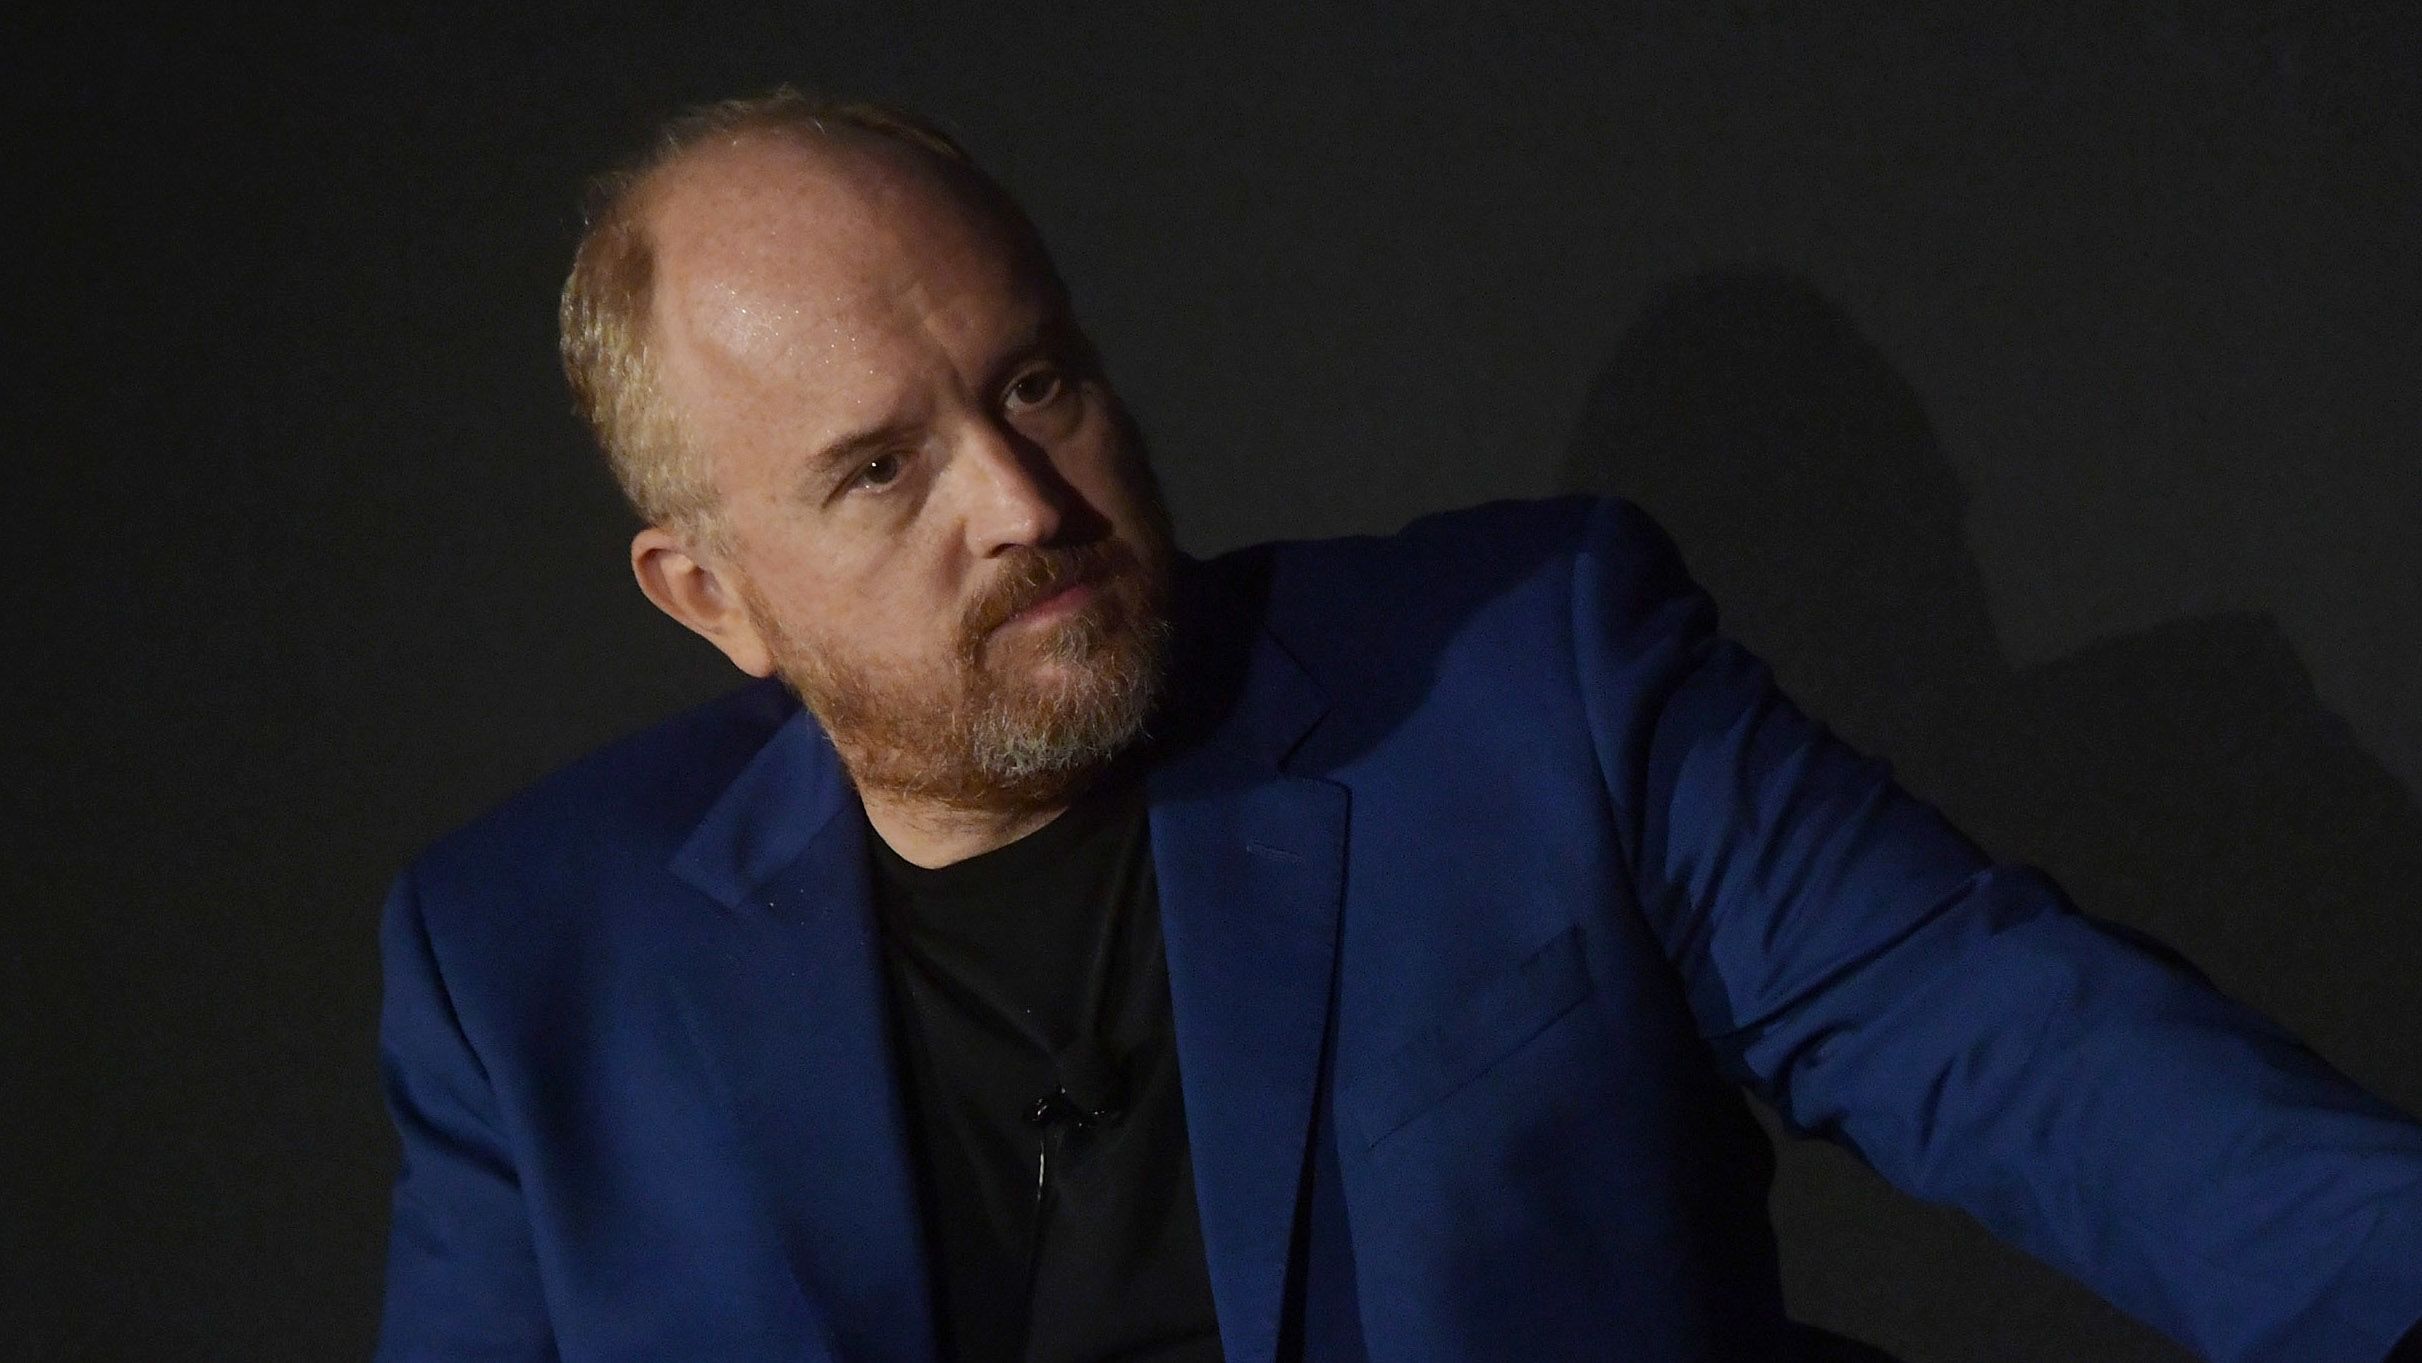 PDF) FEMINIST PERSPECTIVES ON THE APOLOGY OF LOUIS CK Feminist Perspectives  on the Apology of Louis CK and the #MeToo and #TimesUp Movements